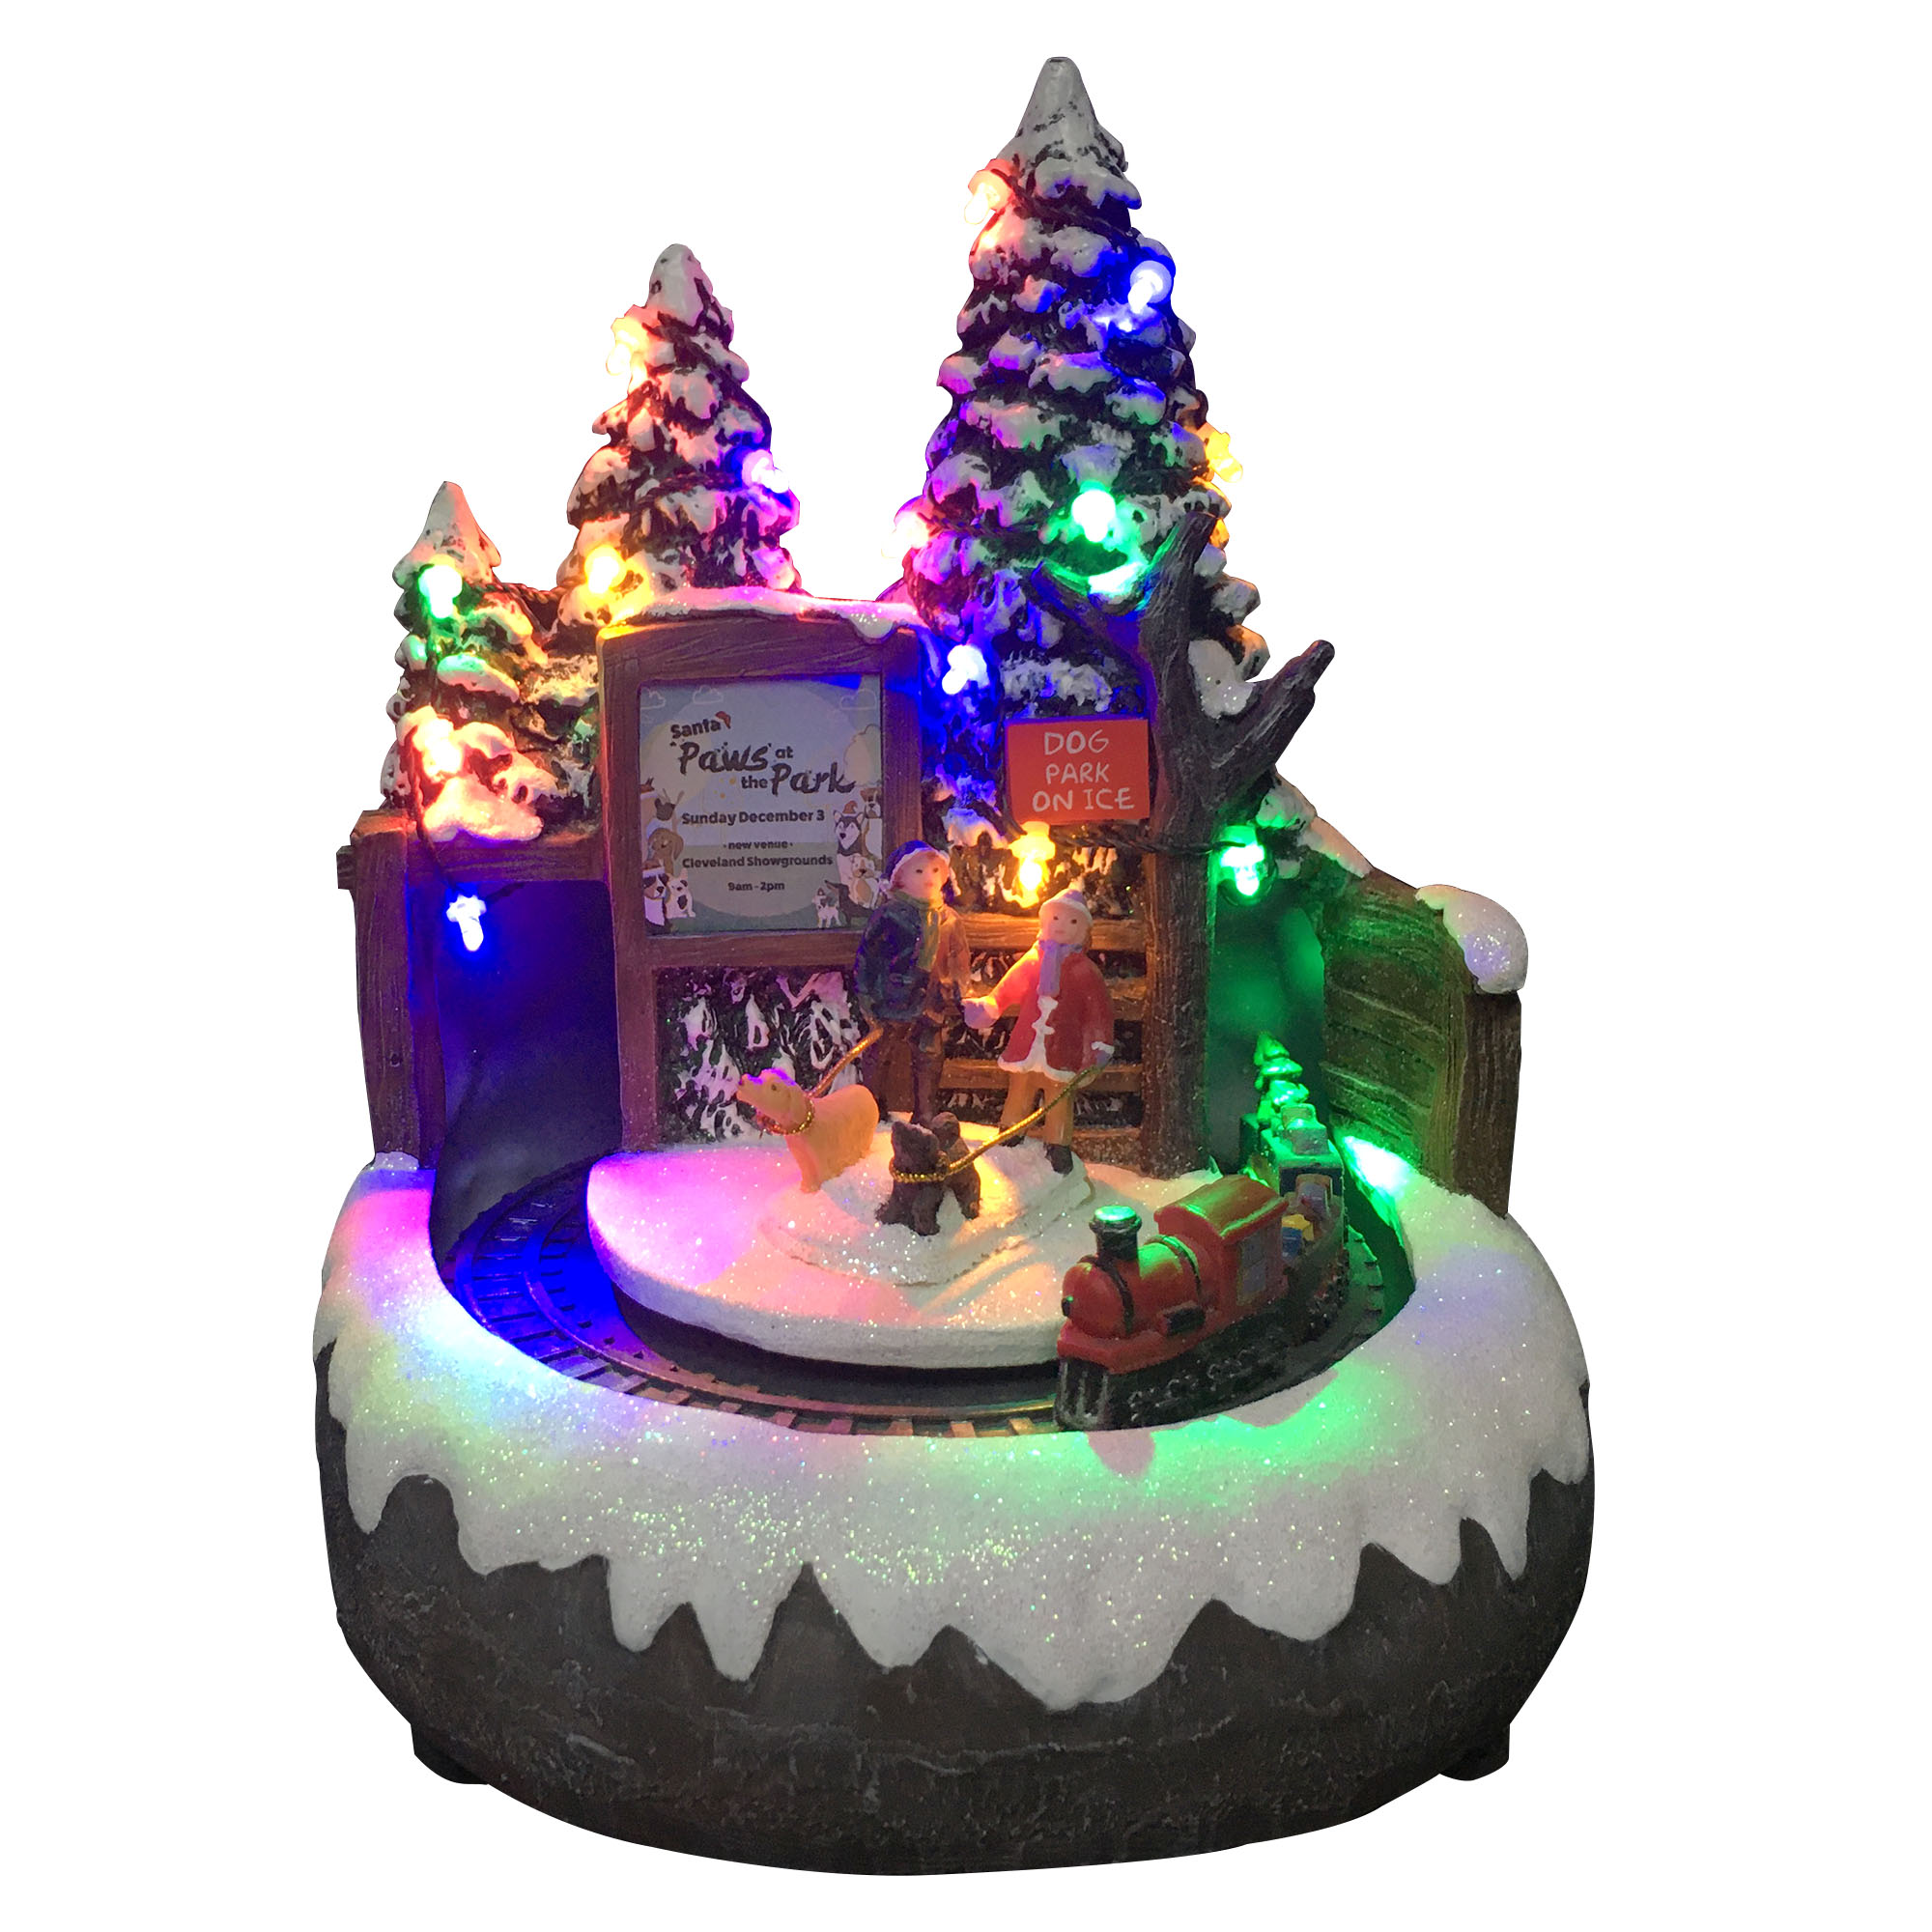 OEM Manufacturer Country Christmas Village Set - LED light up Snow Scene Doggy & rotating Train resin musical Christmas village for seasonal decor and gift – Melody